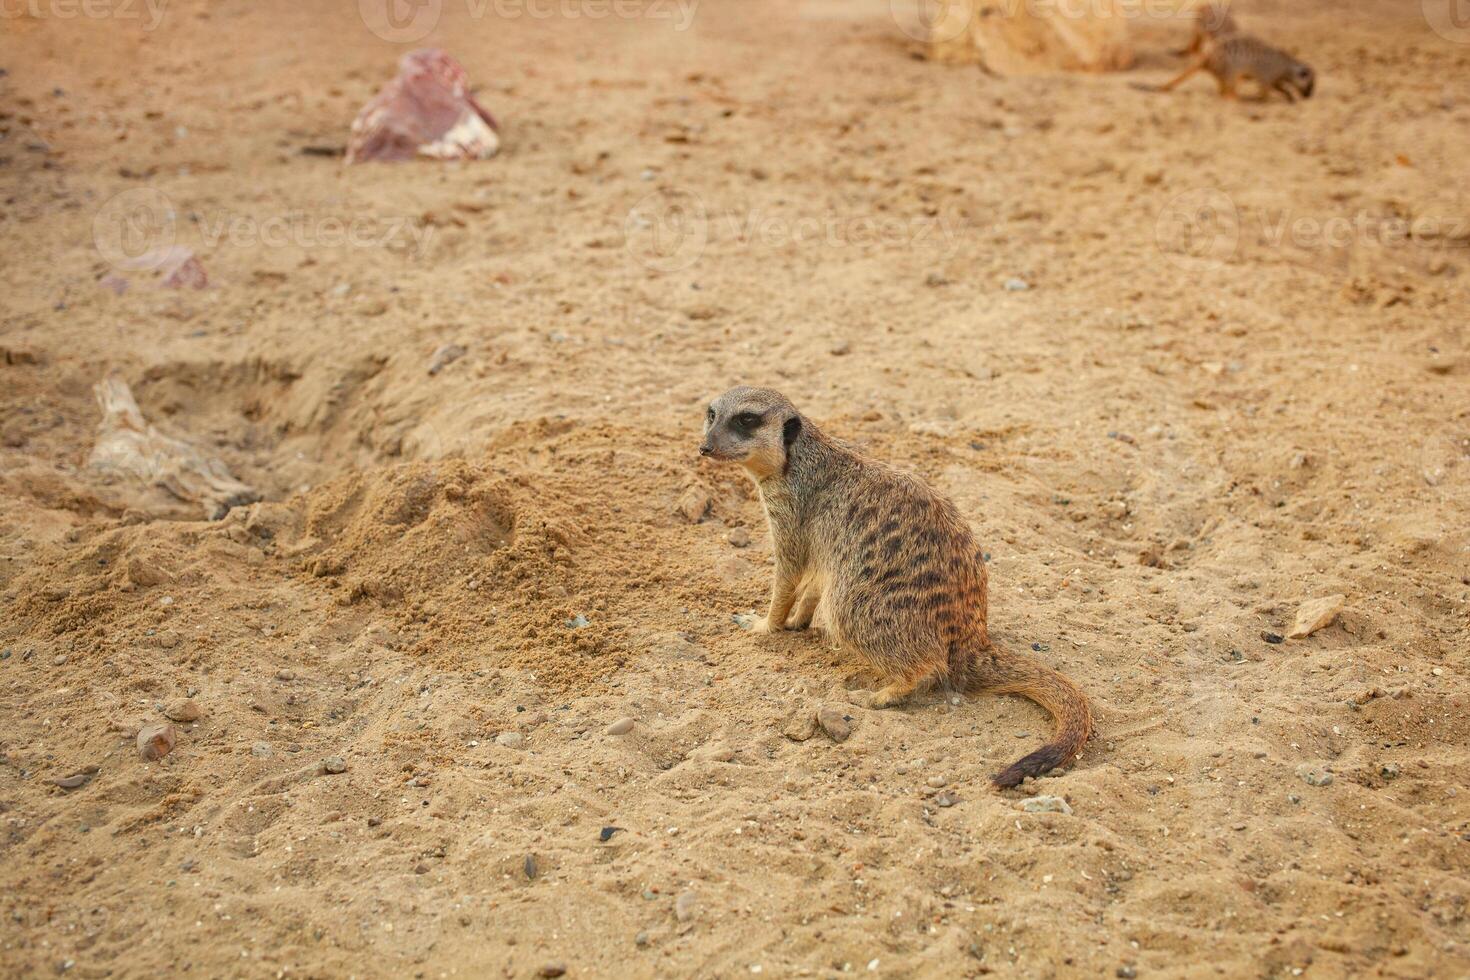 meerkats in the biopark, sit on sand, dig, natural habitat. Beautiful animals, business tourism. small rodents rare exotic animal photo